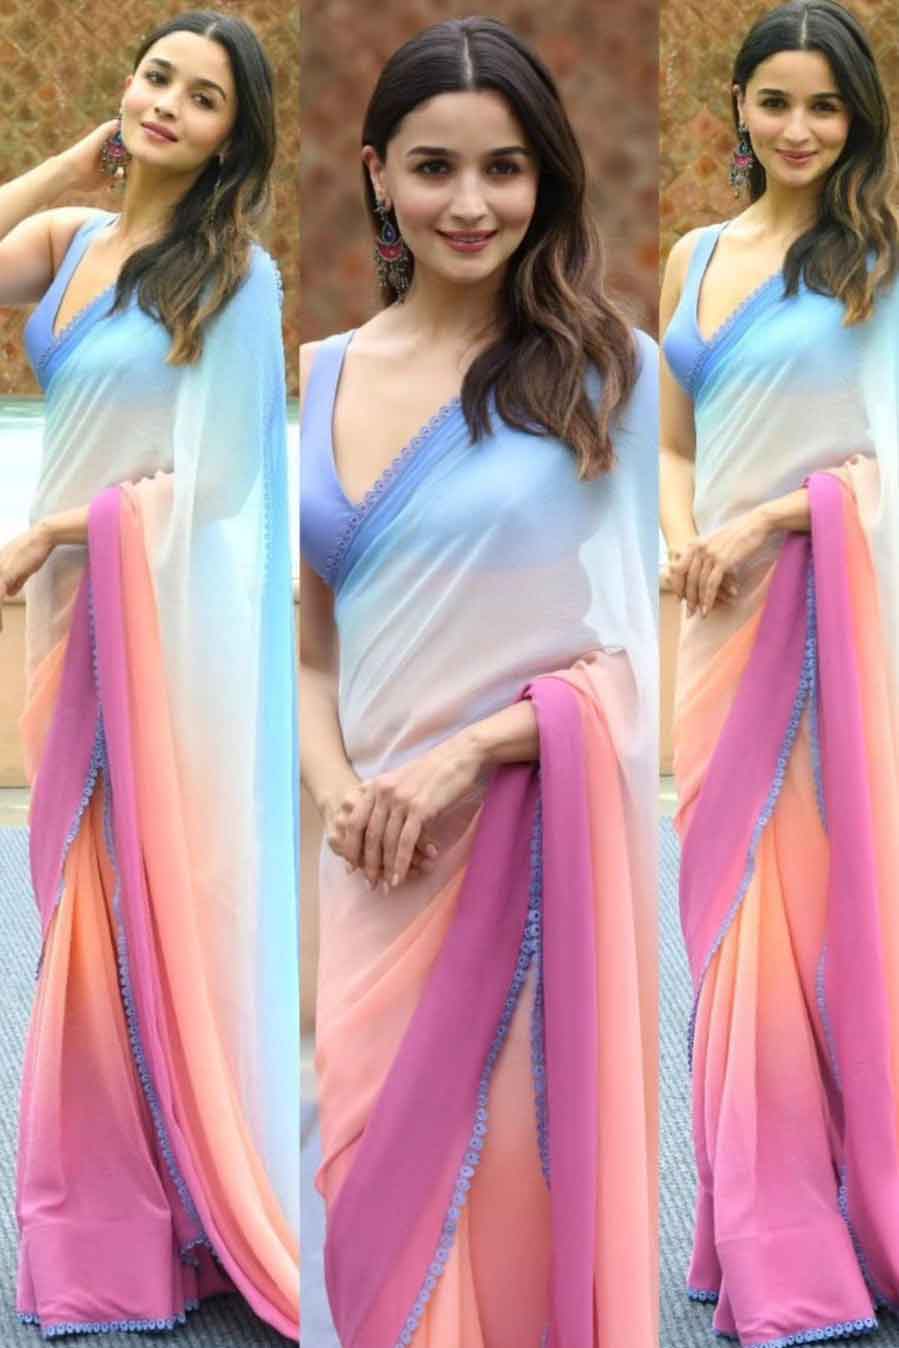 Explore our latest collection of hand-dyed chiffon sarees, inspired by Bollywood actress Alia Bhatt. These fancy, elegant sarees feature the most popular ombre-dyed and tie-and-dye designs. Discover the latest trends in sarees for 2023, showcasing the beautiful and unique work of designer Manish Malhotra.